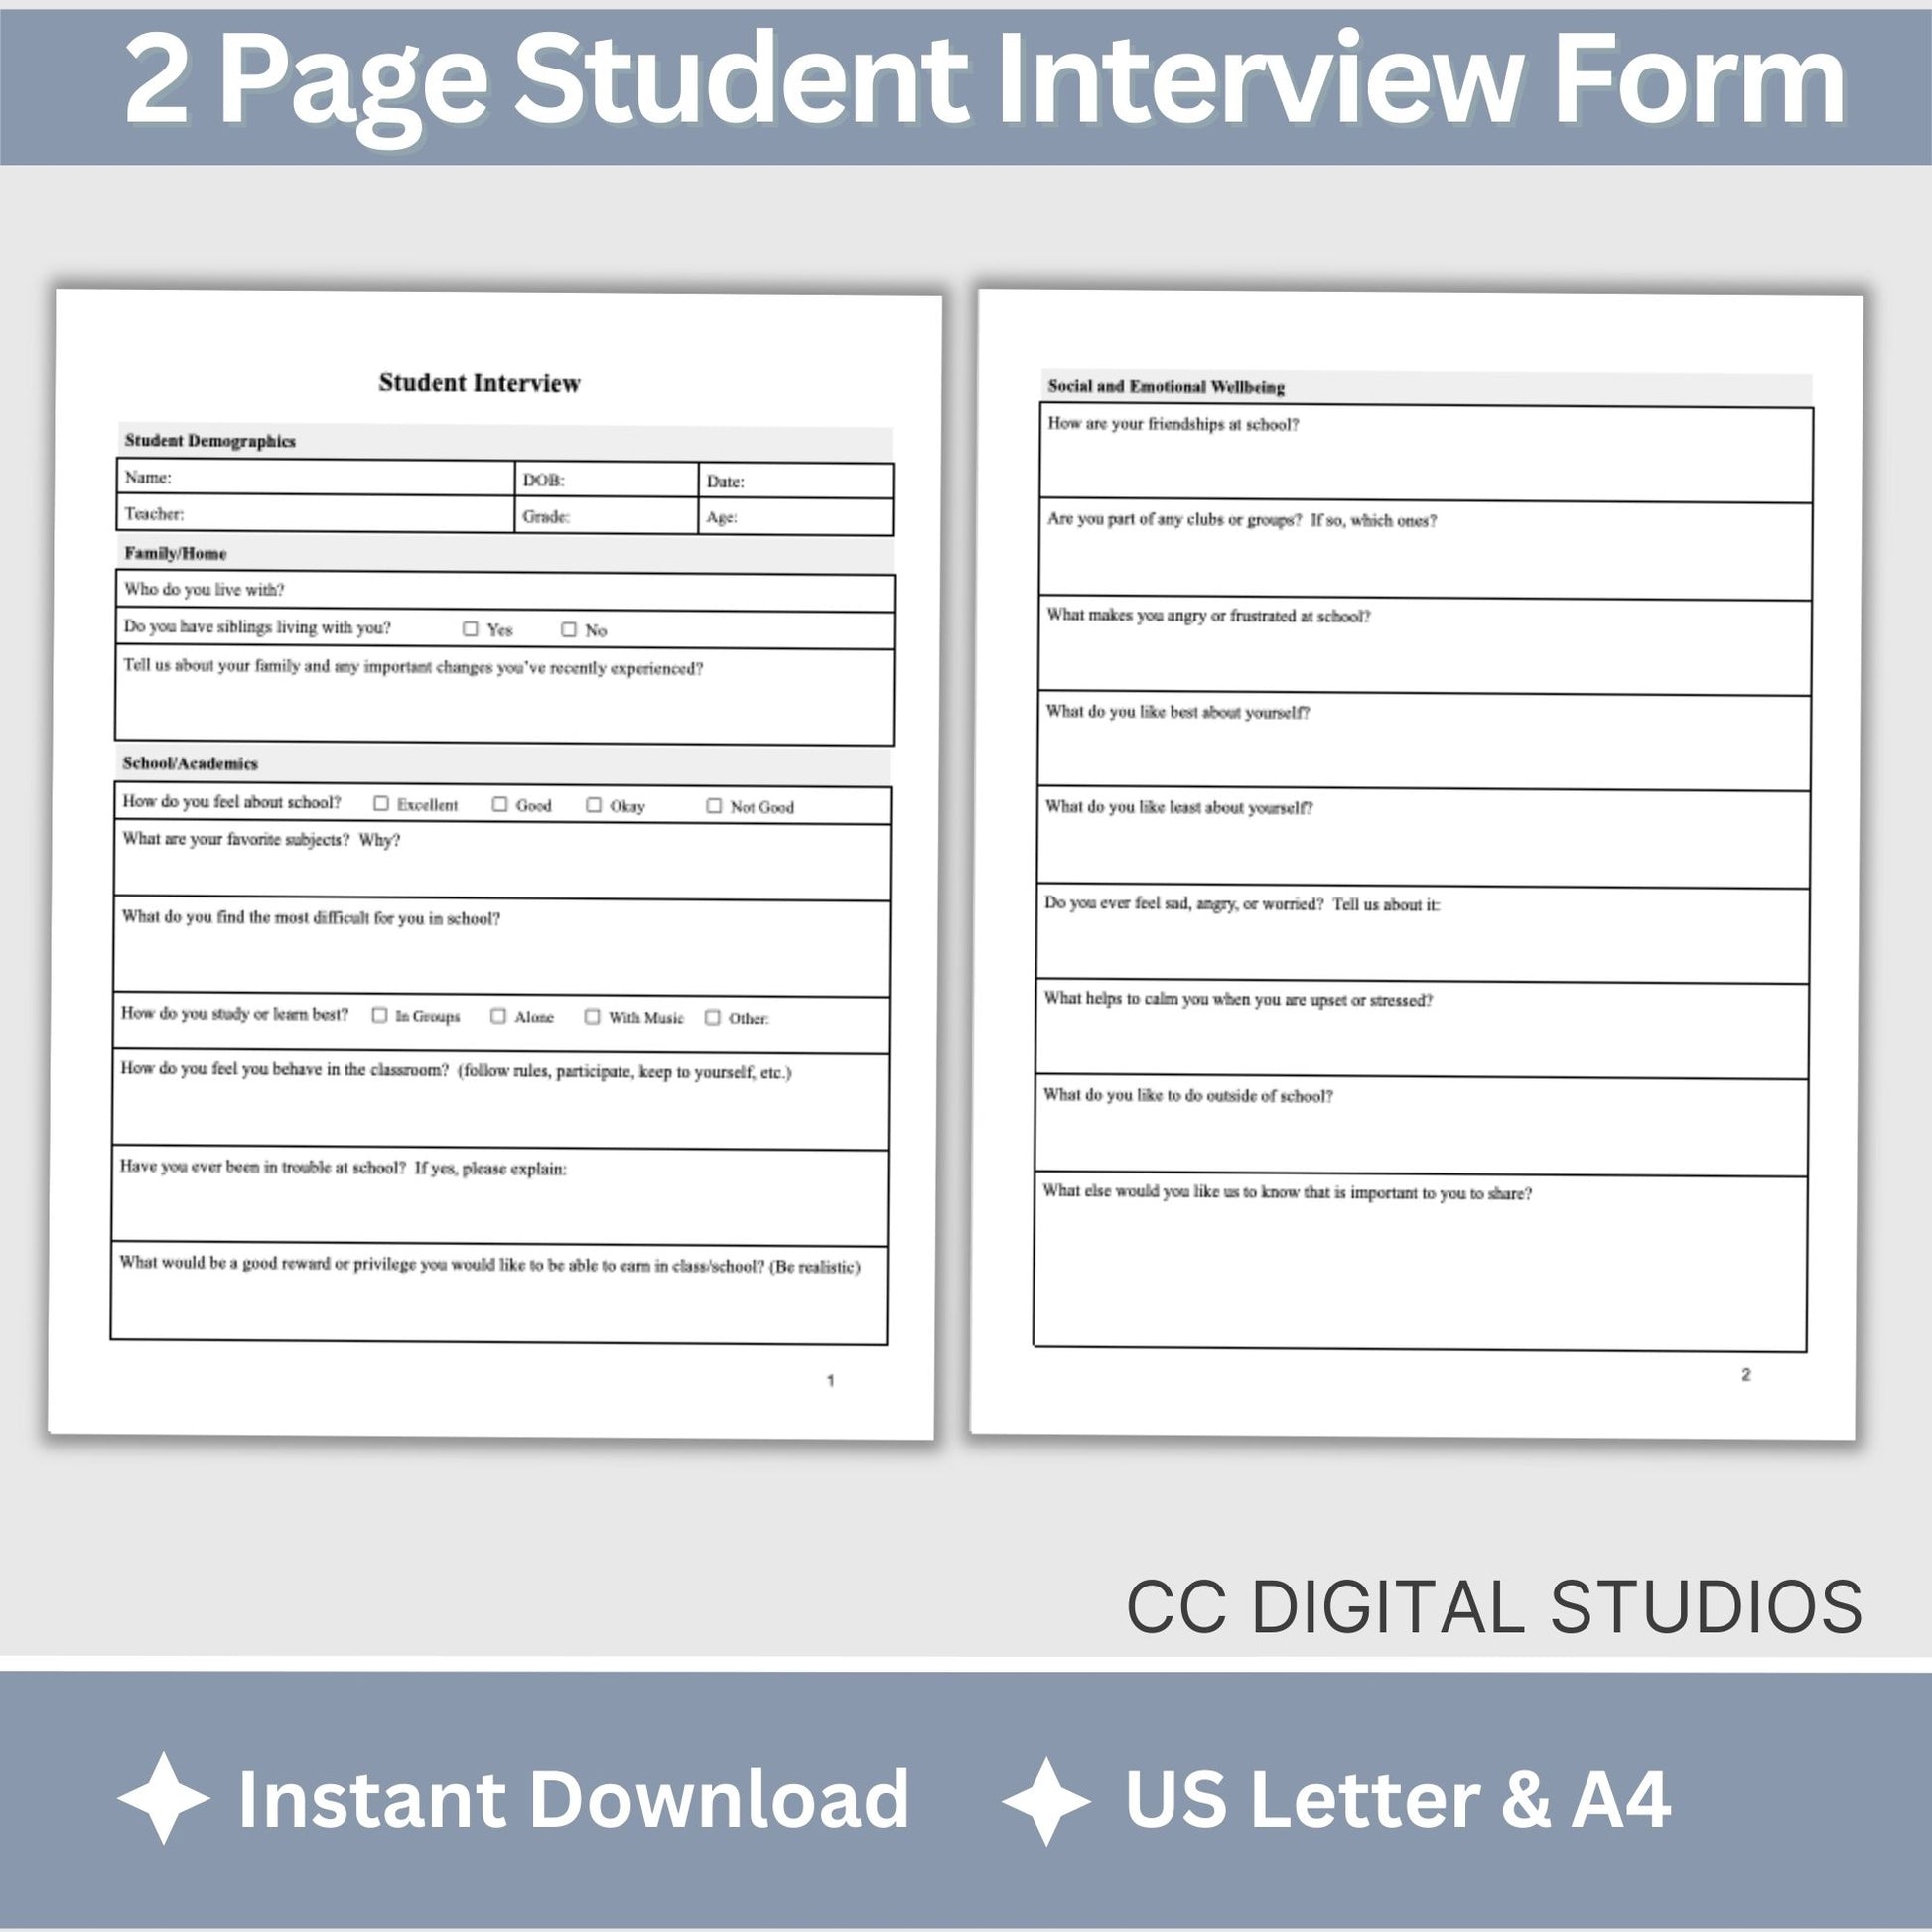 Student Interview Form, an essential tool for school counselors, school psychologists, and school social workers. Its ideal for case management, child therapy, and psychotherapy sessions, aiding in therapy notes documentation.